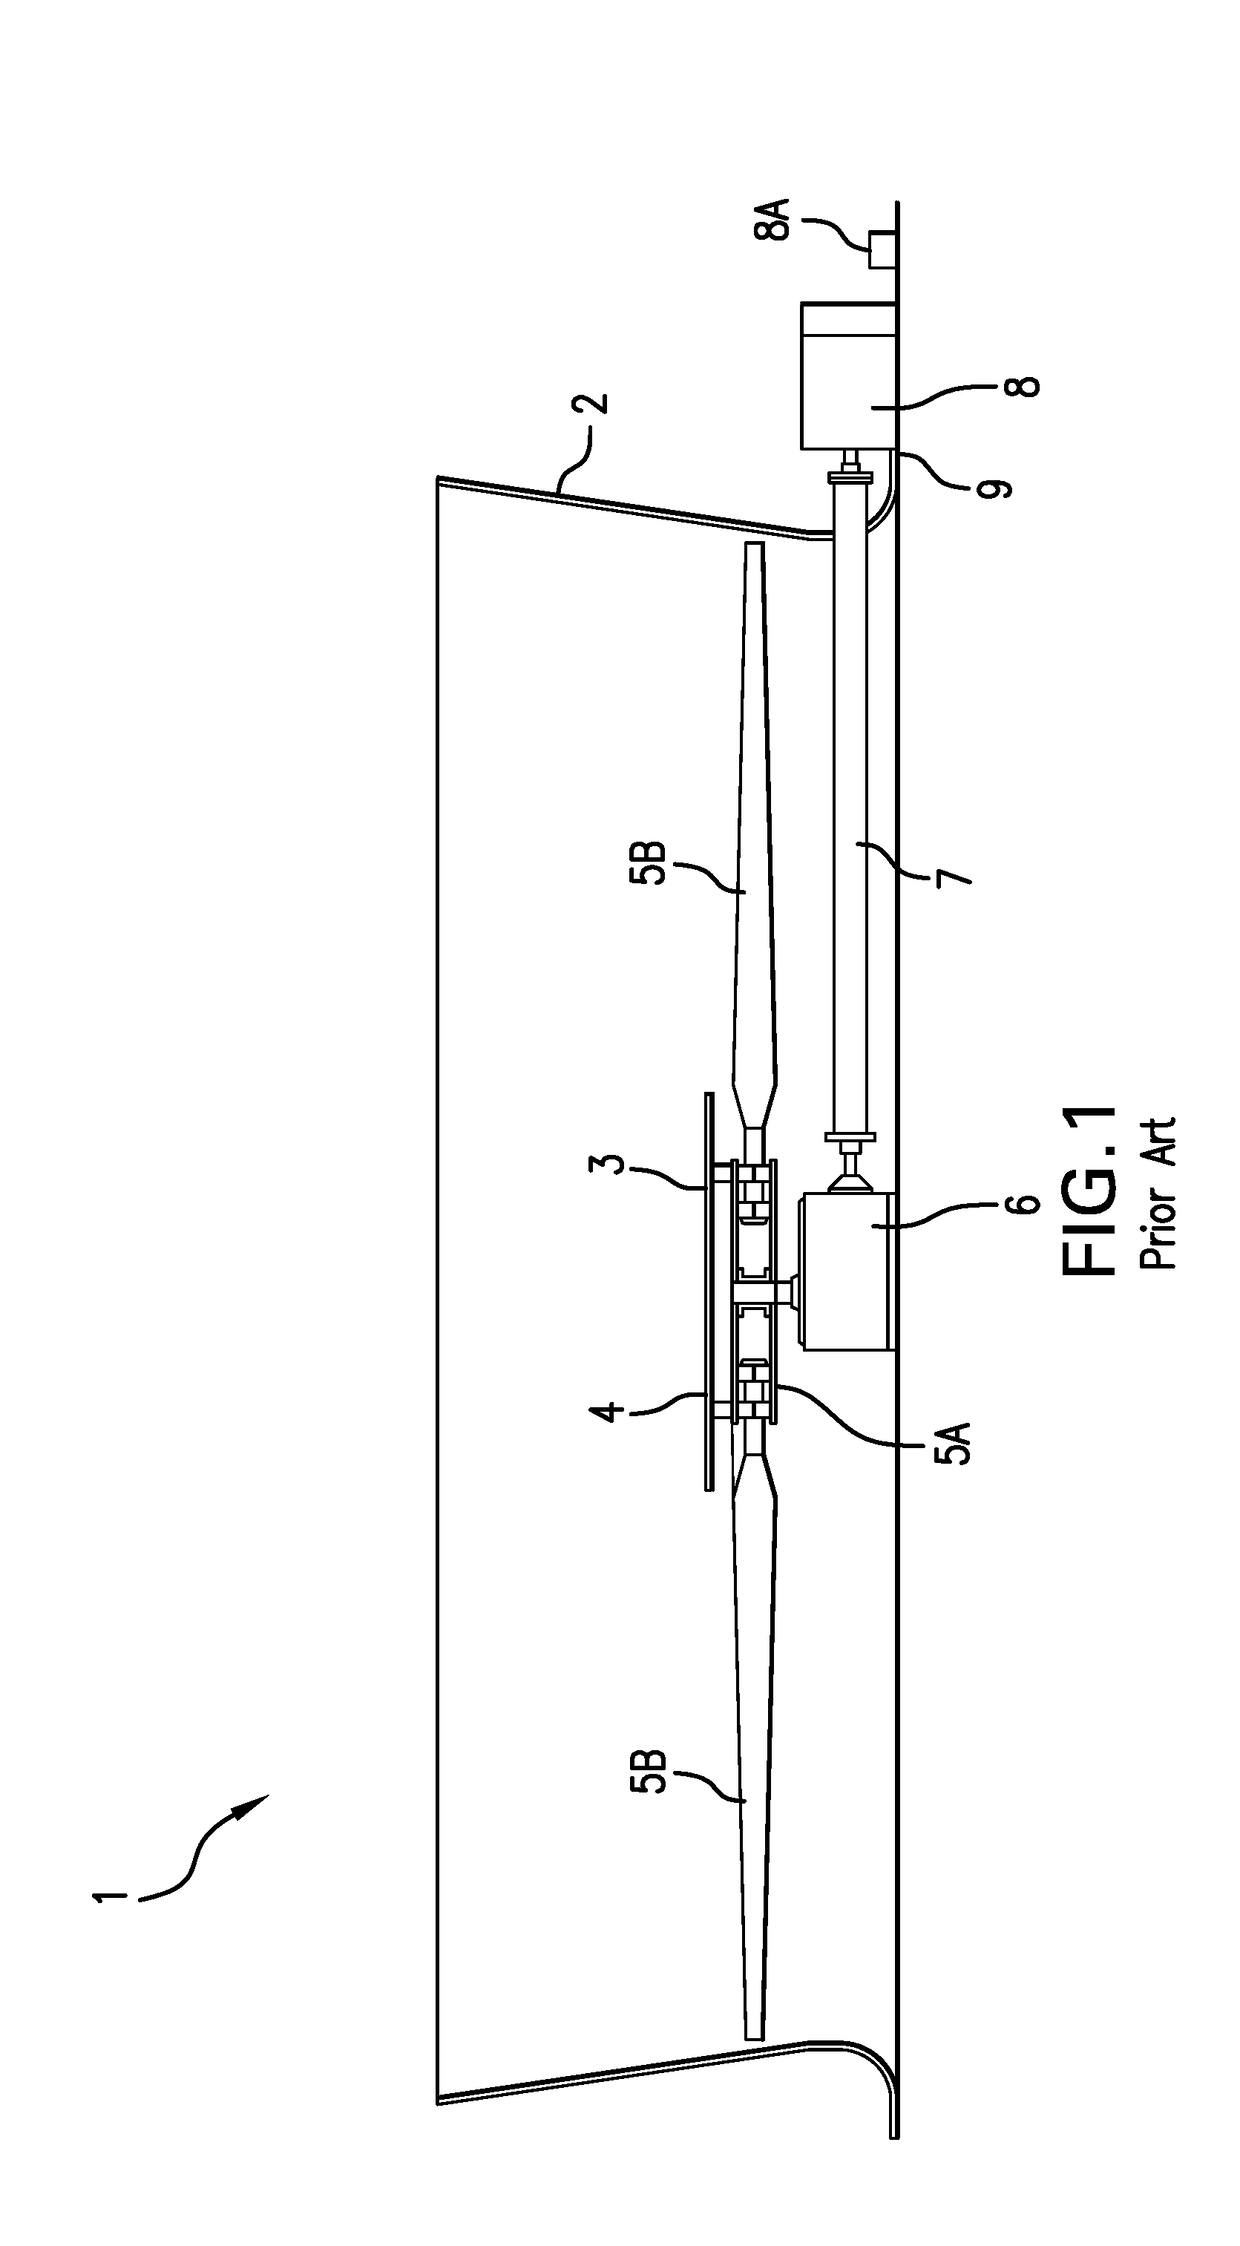 Load Bearing Direct Drive Fan System With Variable Process Control